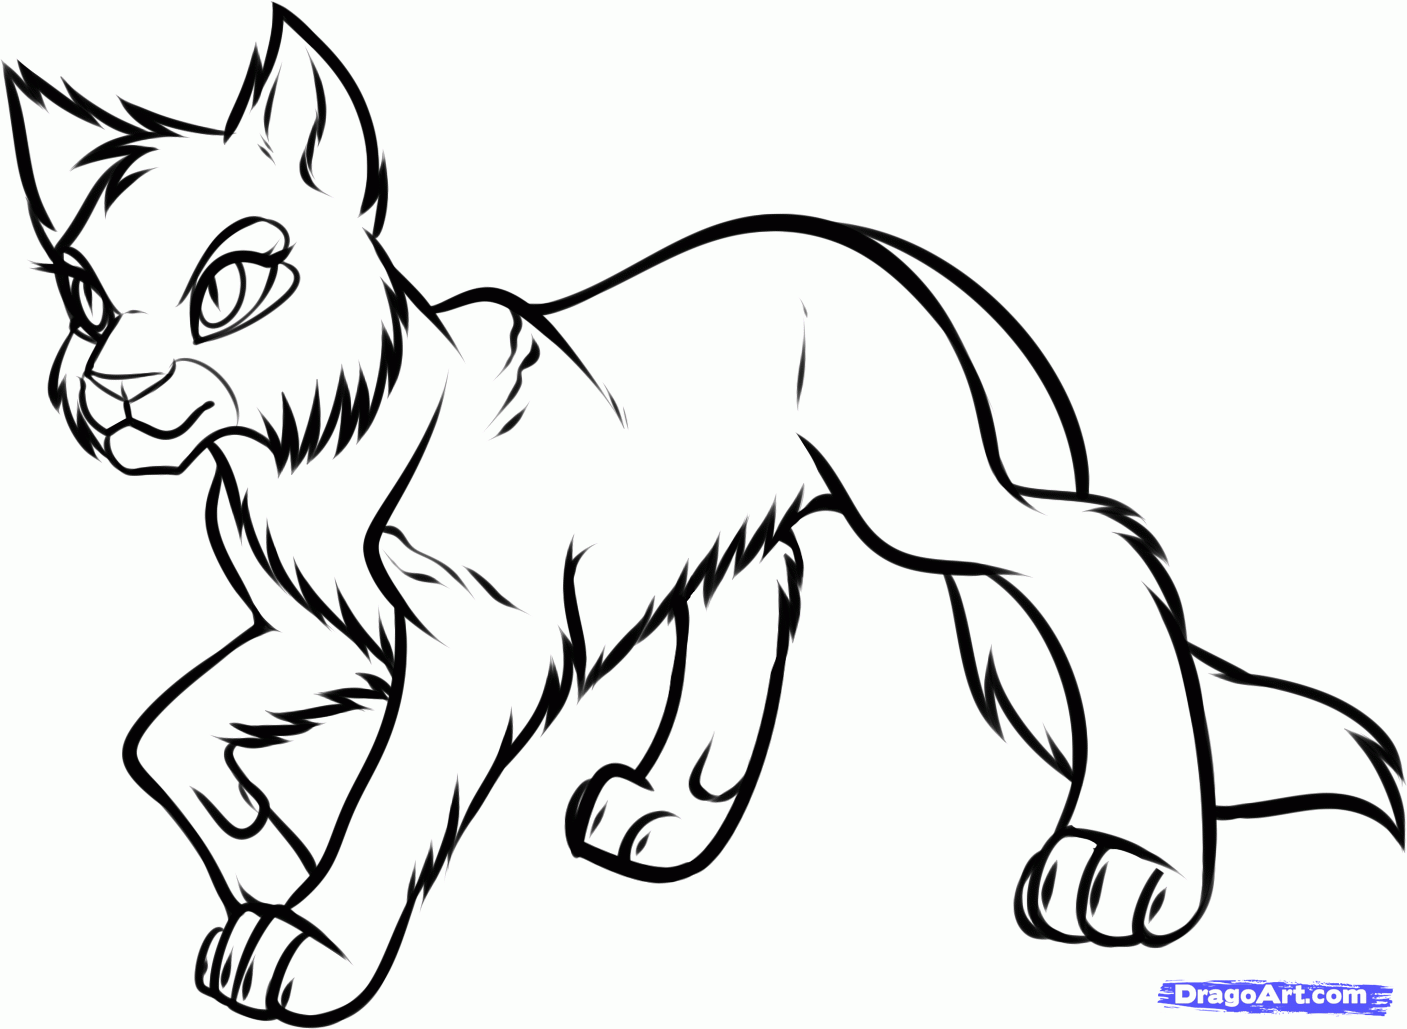 Warrior Cat Coloring Pages To Print - Coloring Home